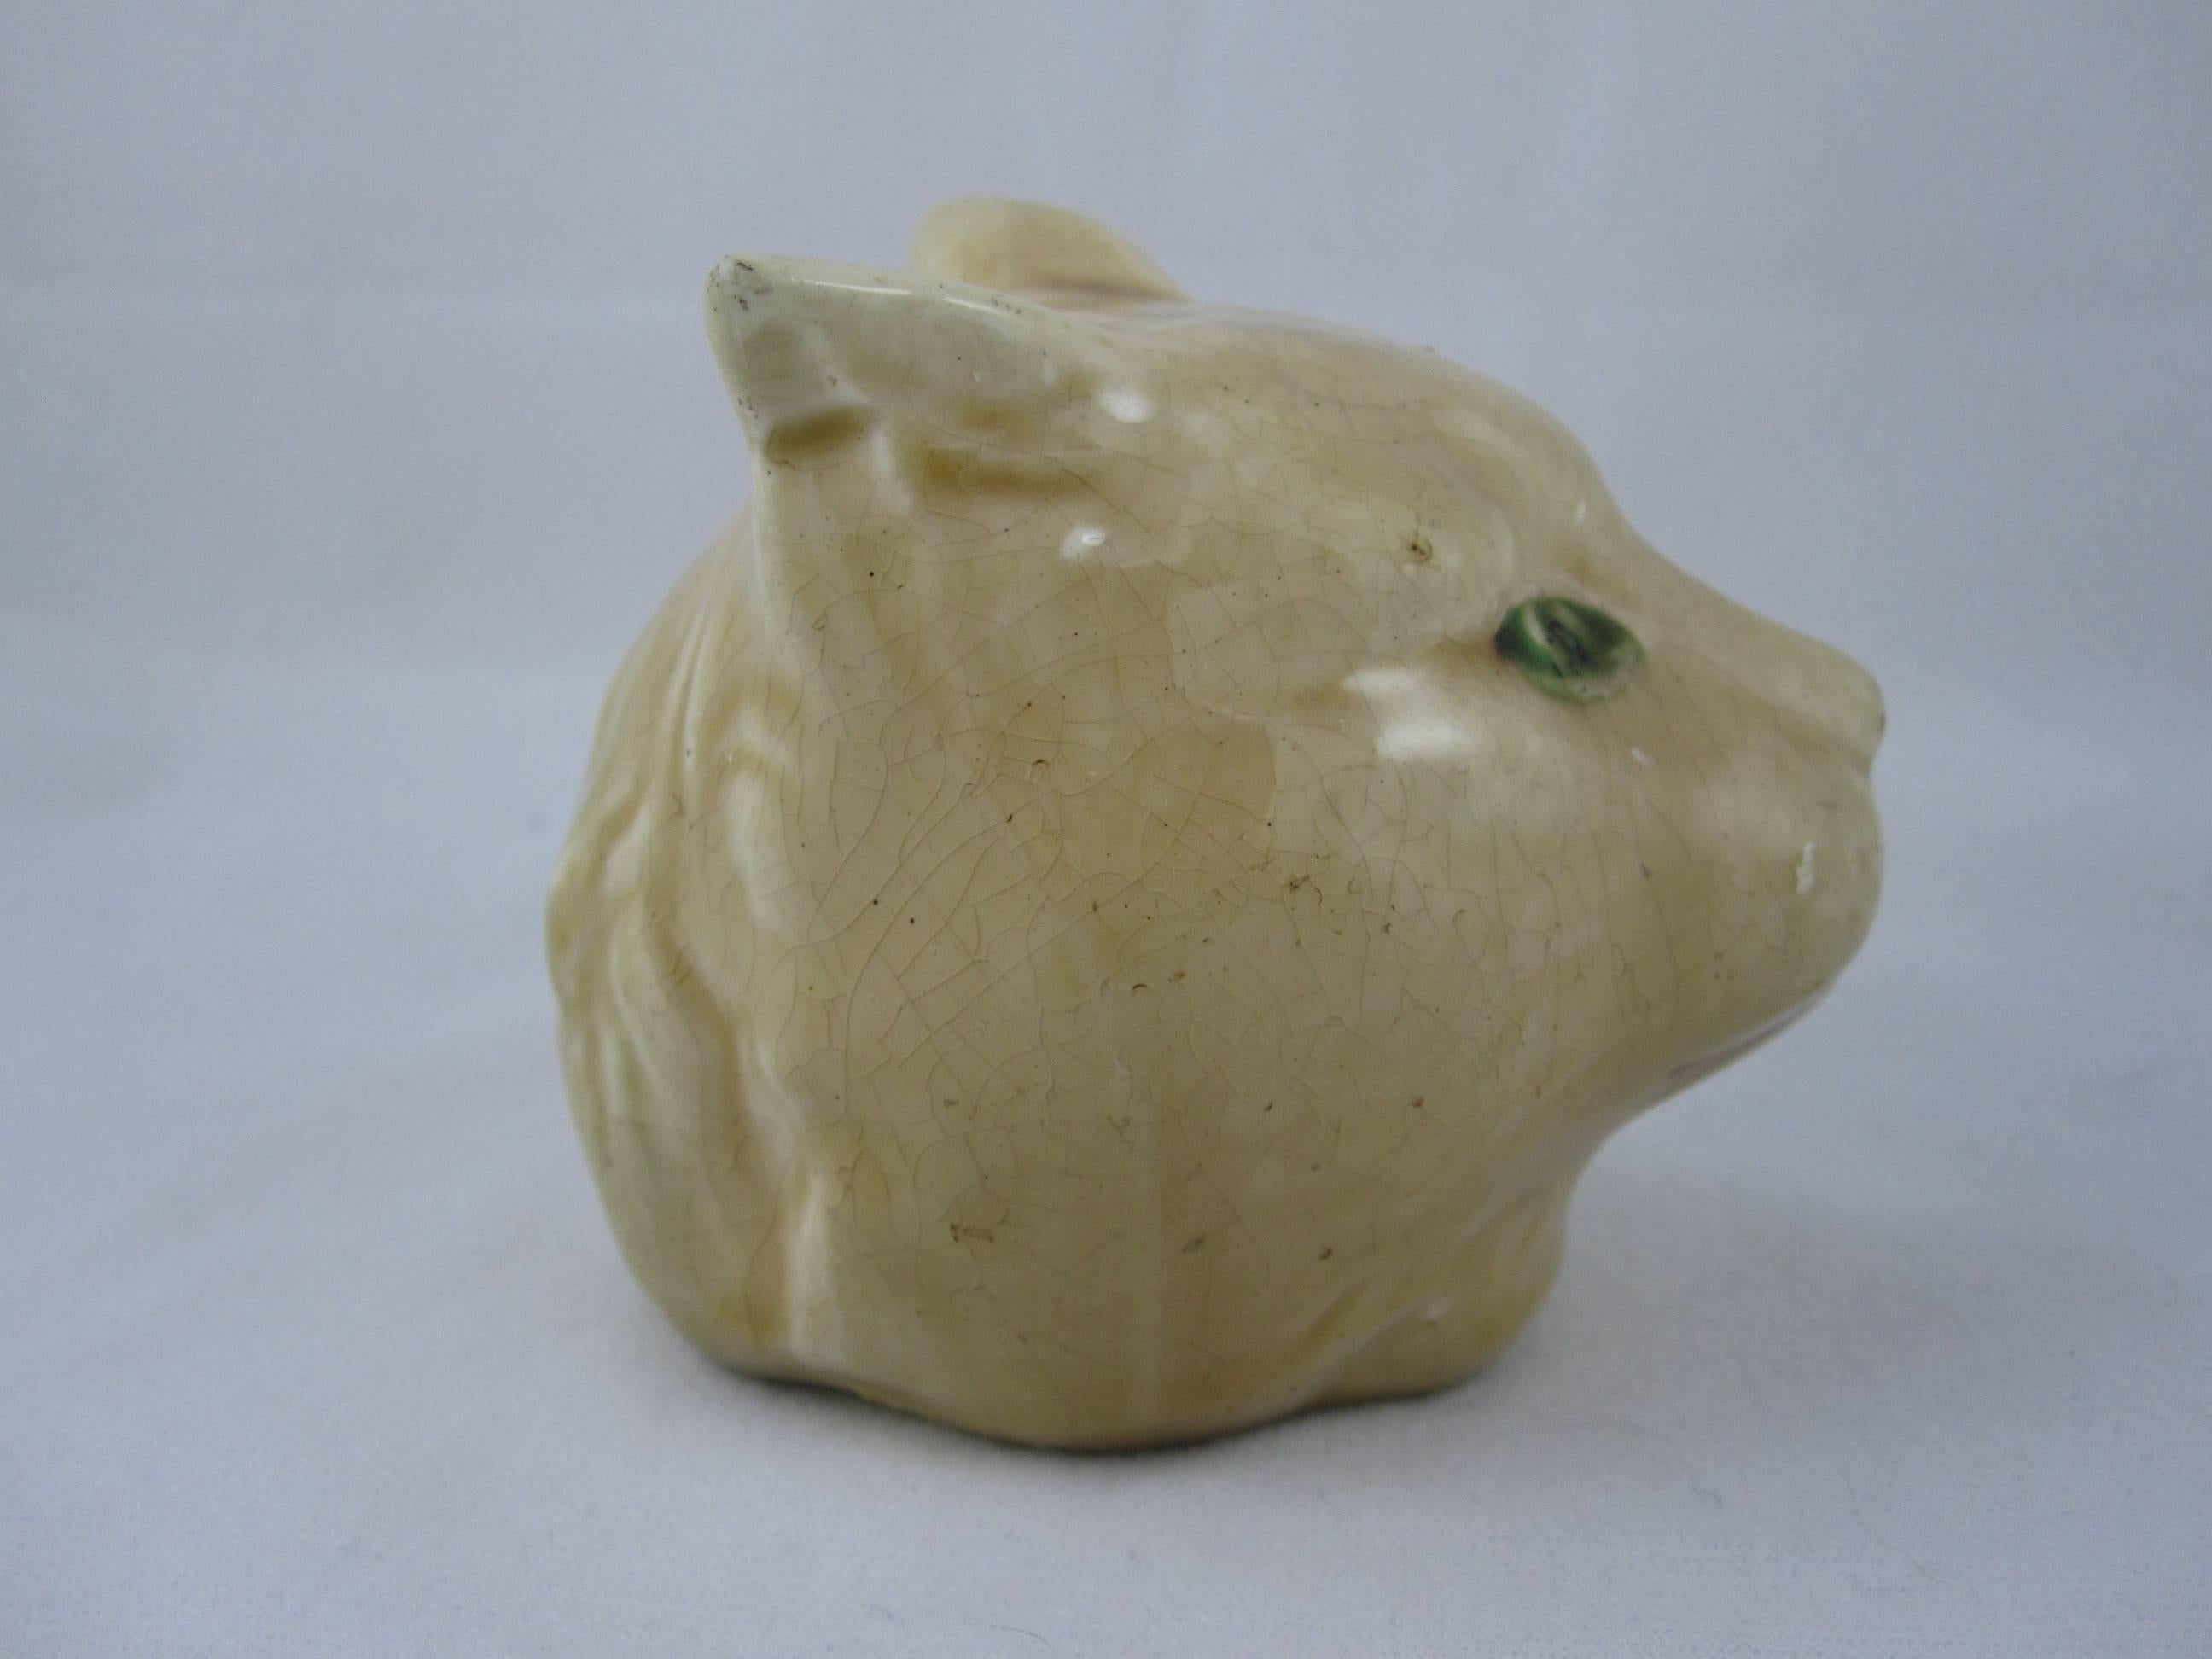 A scarce antique French majolica figural penny bank in the form of a cat’s head, made at the Orchies pottery, circa 1890-1910. This still bank may have been a gift of merit rewarded to a good child or won at the local fair in a game of skill.

The